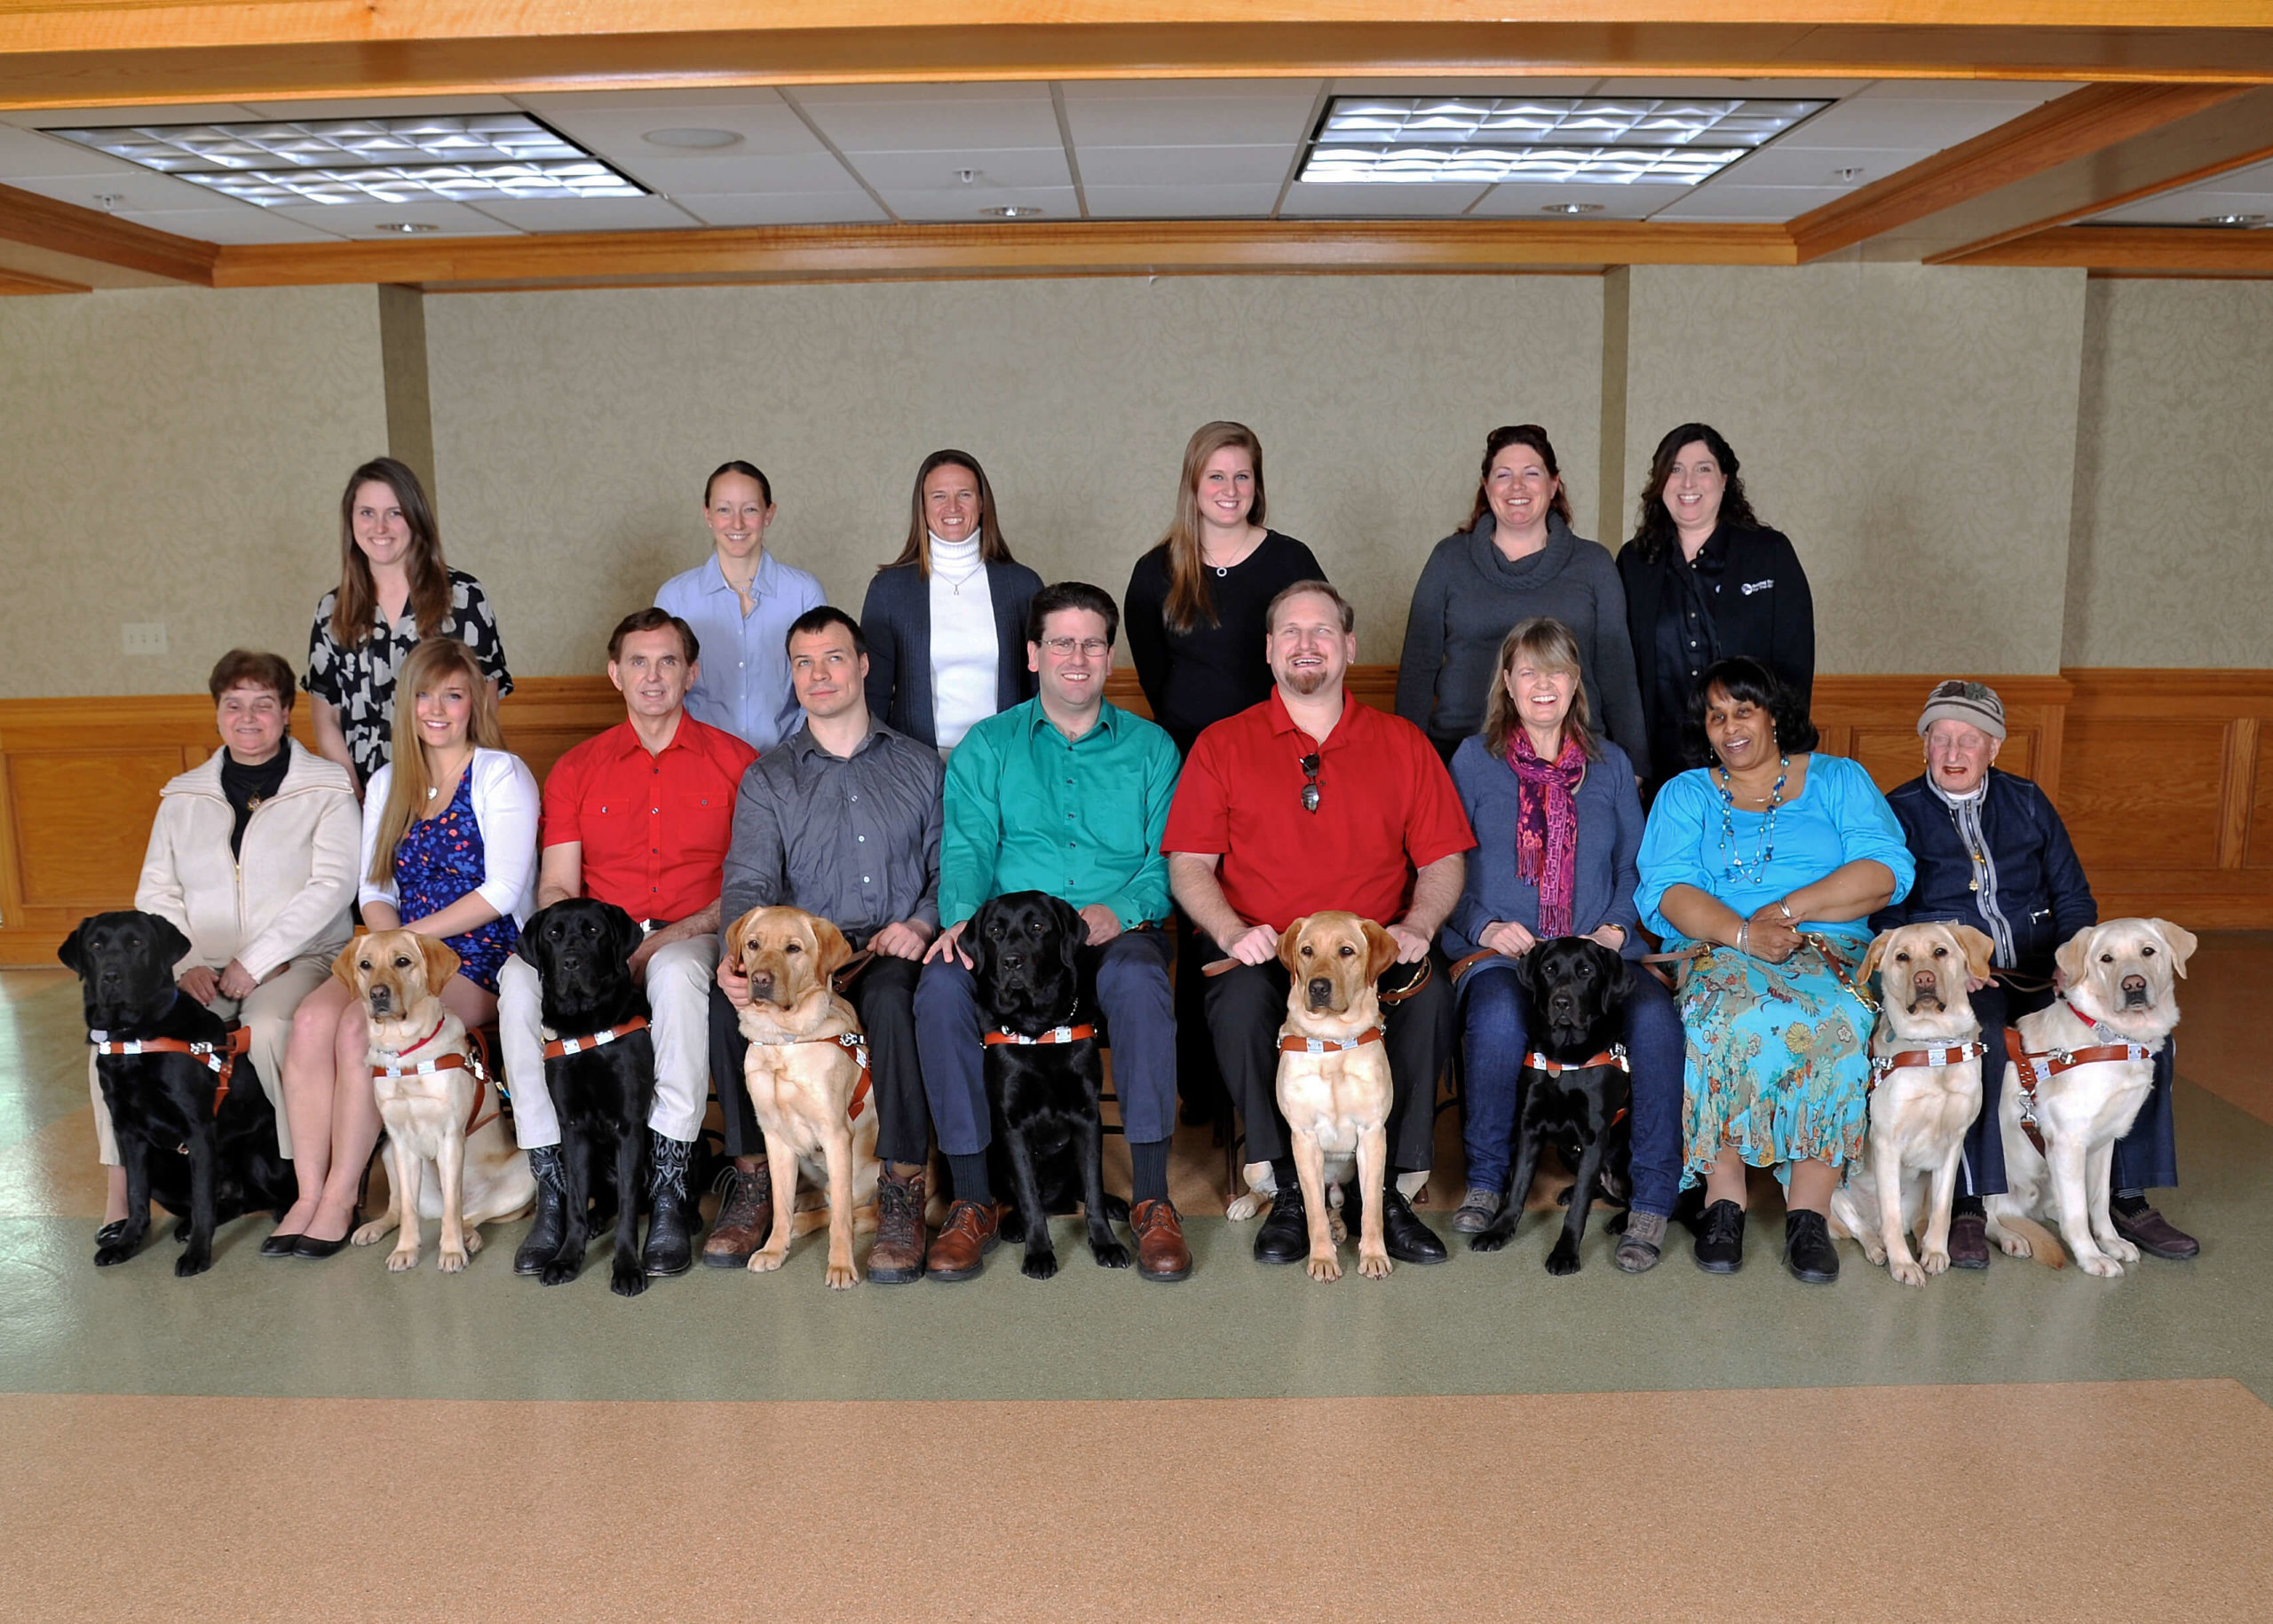 Group photo - class of March 2014